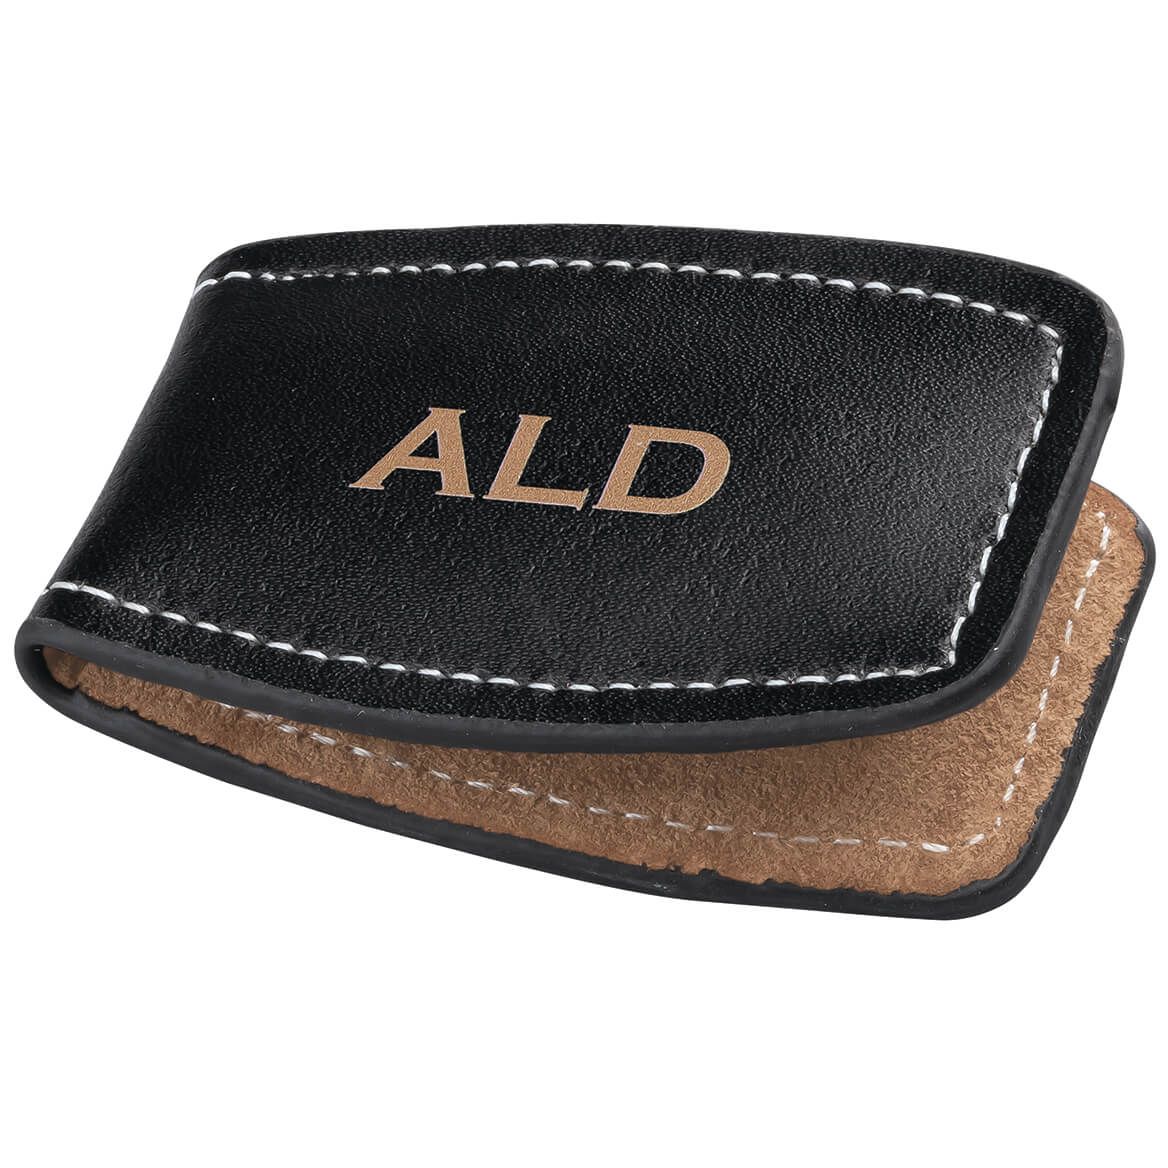 Personalized Leather Money Clip + '-' + 314592